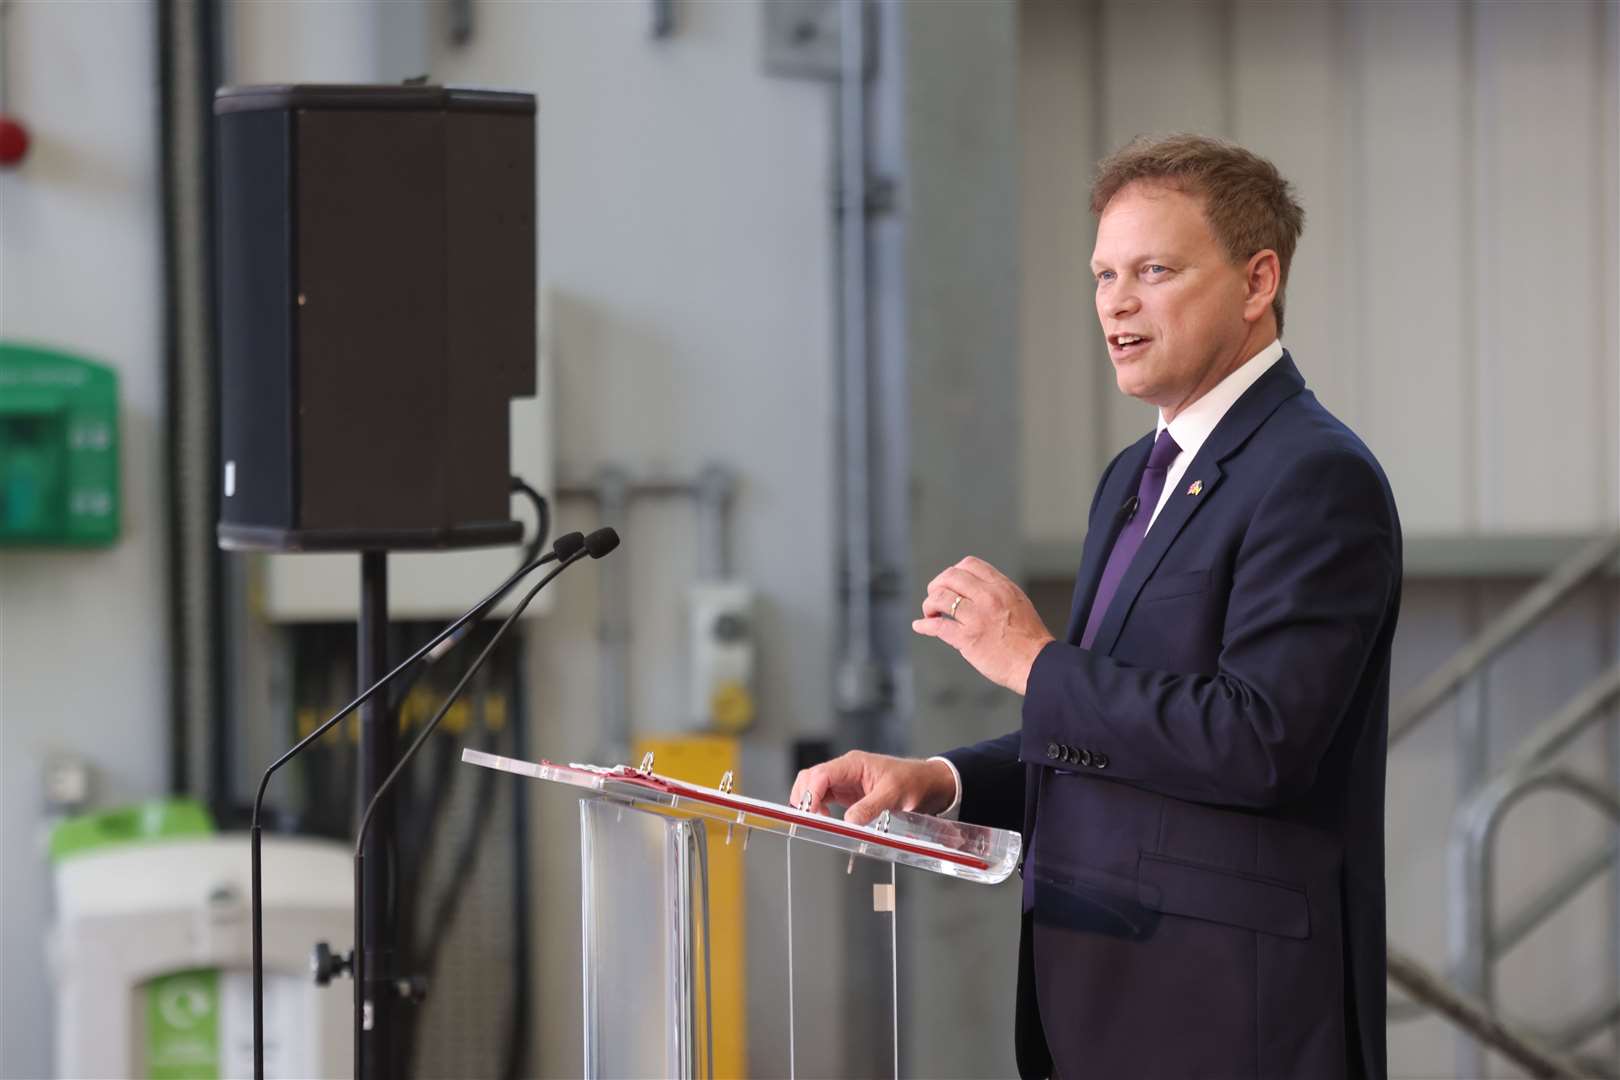 Transport Secretary Grant Shapps described some railway working practices as “archaic” in his tweets (PA)